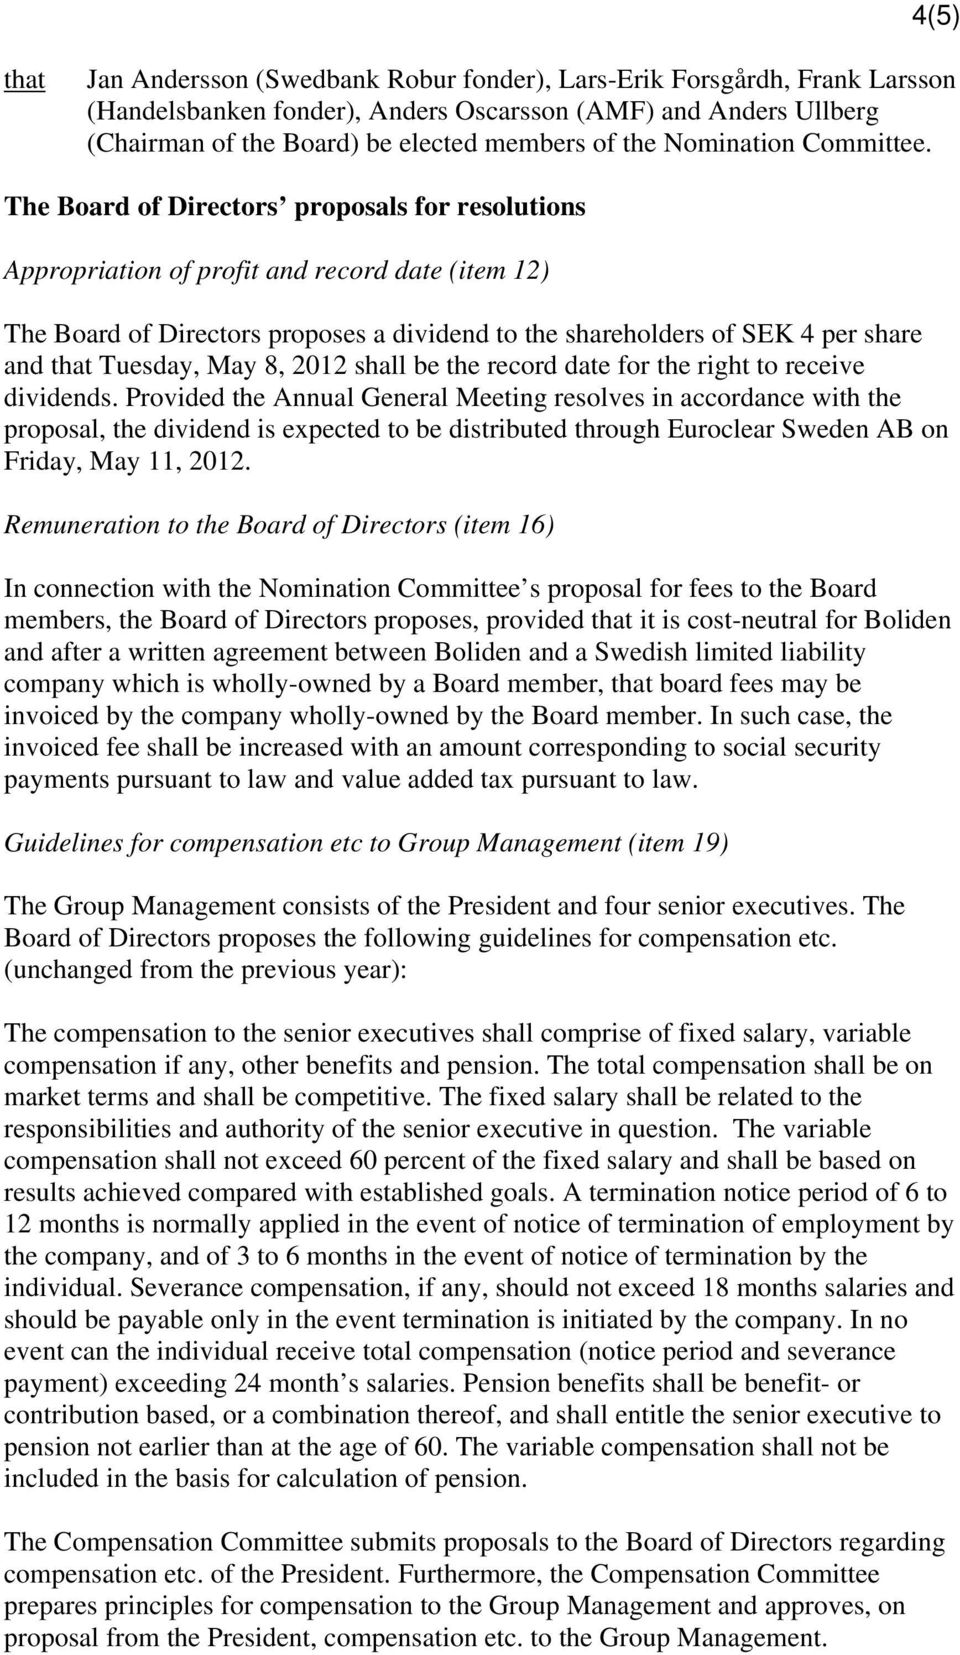 The Board of Directors proposals for resolutions Appropriation of profit and record date (item 12) The Board of Directors proposes a dividend to the shareholders of SEK 4 per share and Tuesday, May